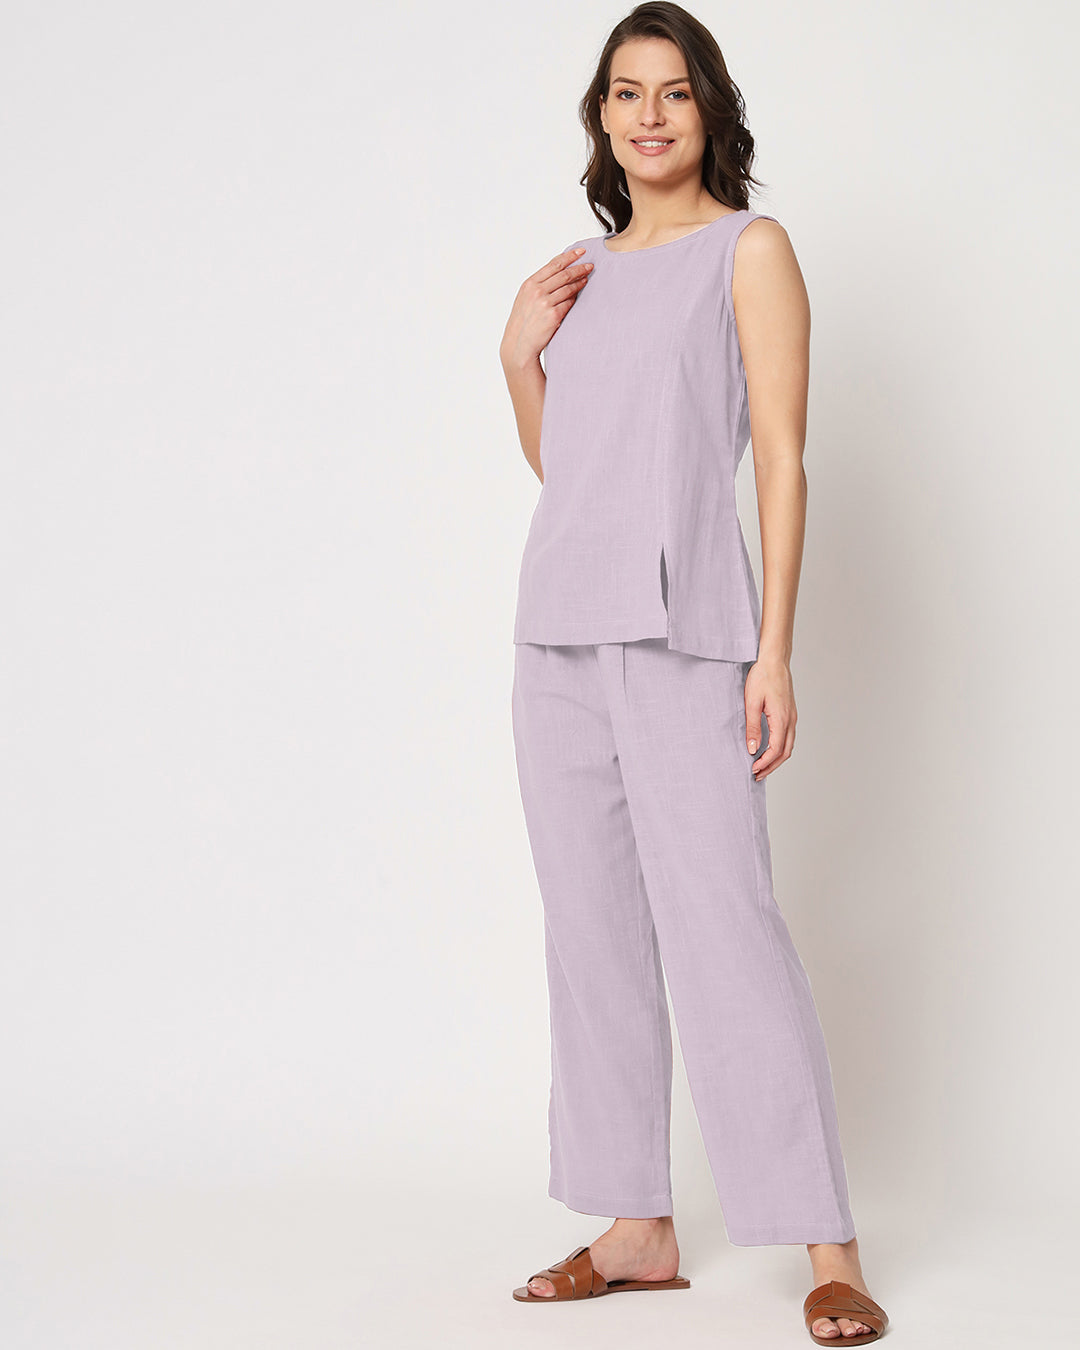 Lilac Sleeveless Short Length Solid Co-ord Set